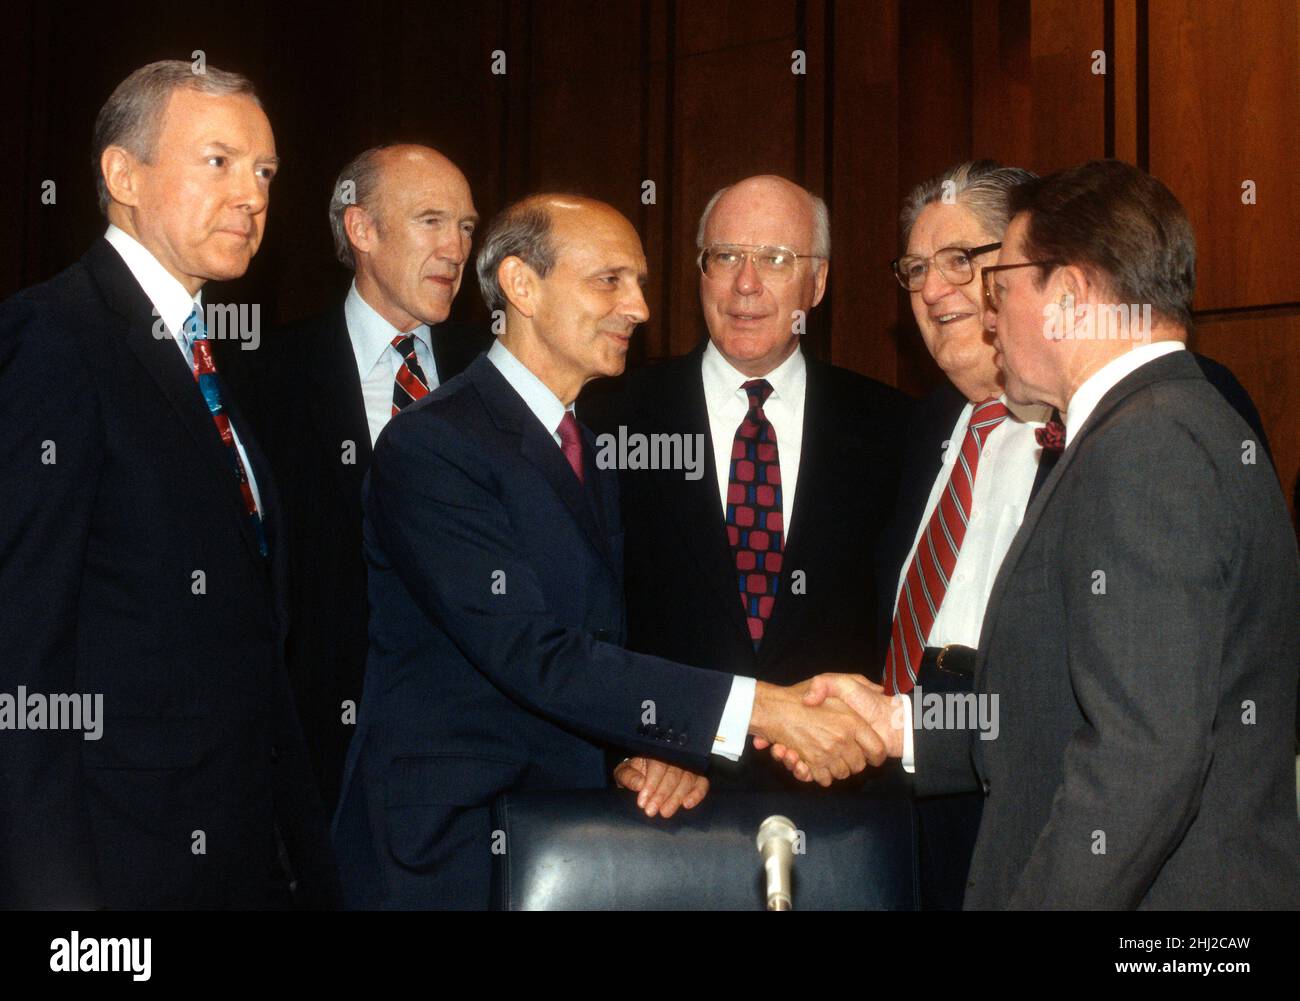 United States Senator Paul Simon (Democrat of Illinois), right, welcomes Chief Judge of the US Court of Appeals for the First Circuit, Stephen G. Breyer, US President Bill Clintons nominee to replace the retiring Justice Harry Blackmun as Associate Justice of the US Supreme Court, third left, to his confirmation hearing on Capitol Hill in Washington, DC on July 12, 1994. From left to right; US Senator Orrin Hatch (Republican of Utah), US Senator Alan Simpson (Republican of Wyoming), Judge Breyer, United States Senator Patrick Leahy (Democrat of Vermont), US Senator Howell Heflin (Democrat of Stock Photo